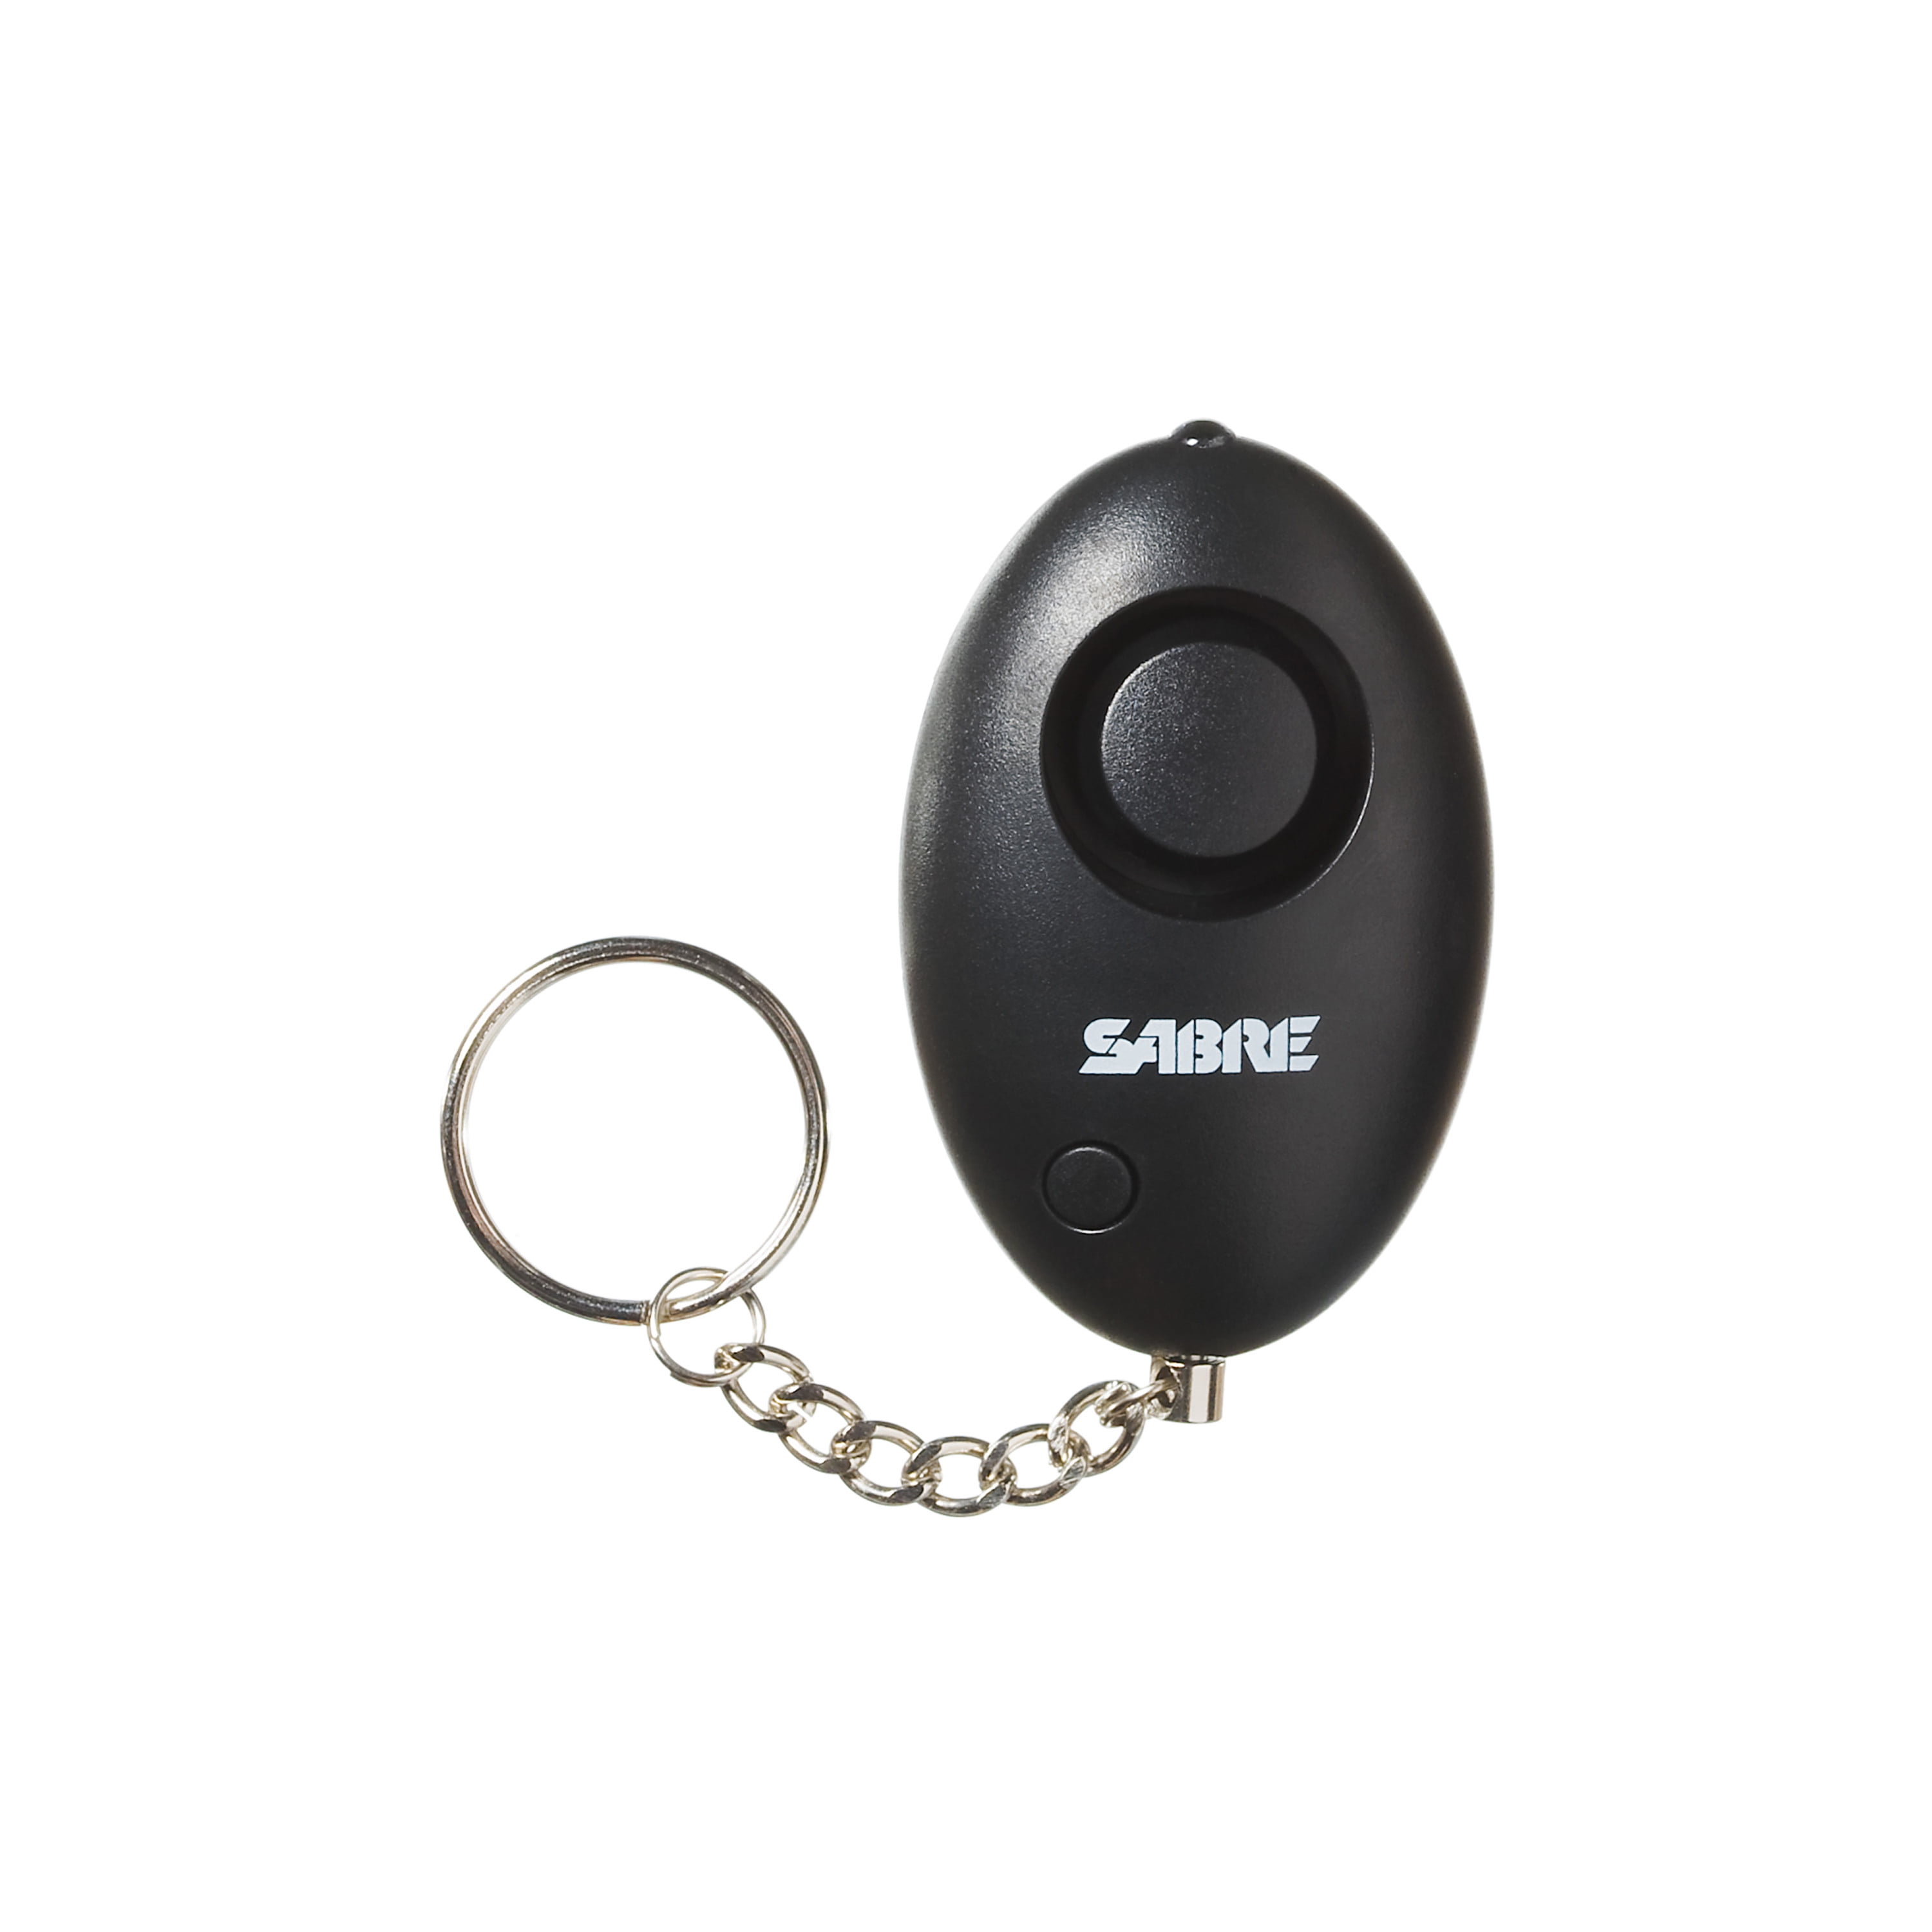 SABRE Personal Self-Defense Safety Alarm on Key Ring with LOUD Dual Alarm Siren 